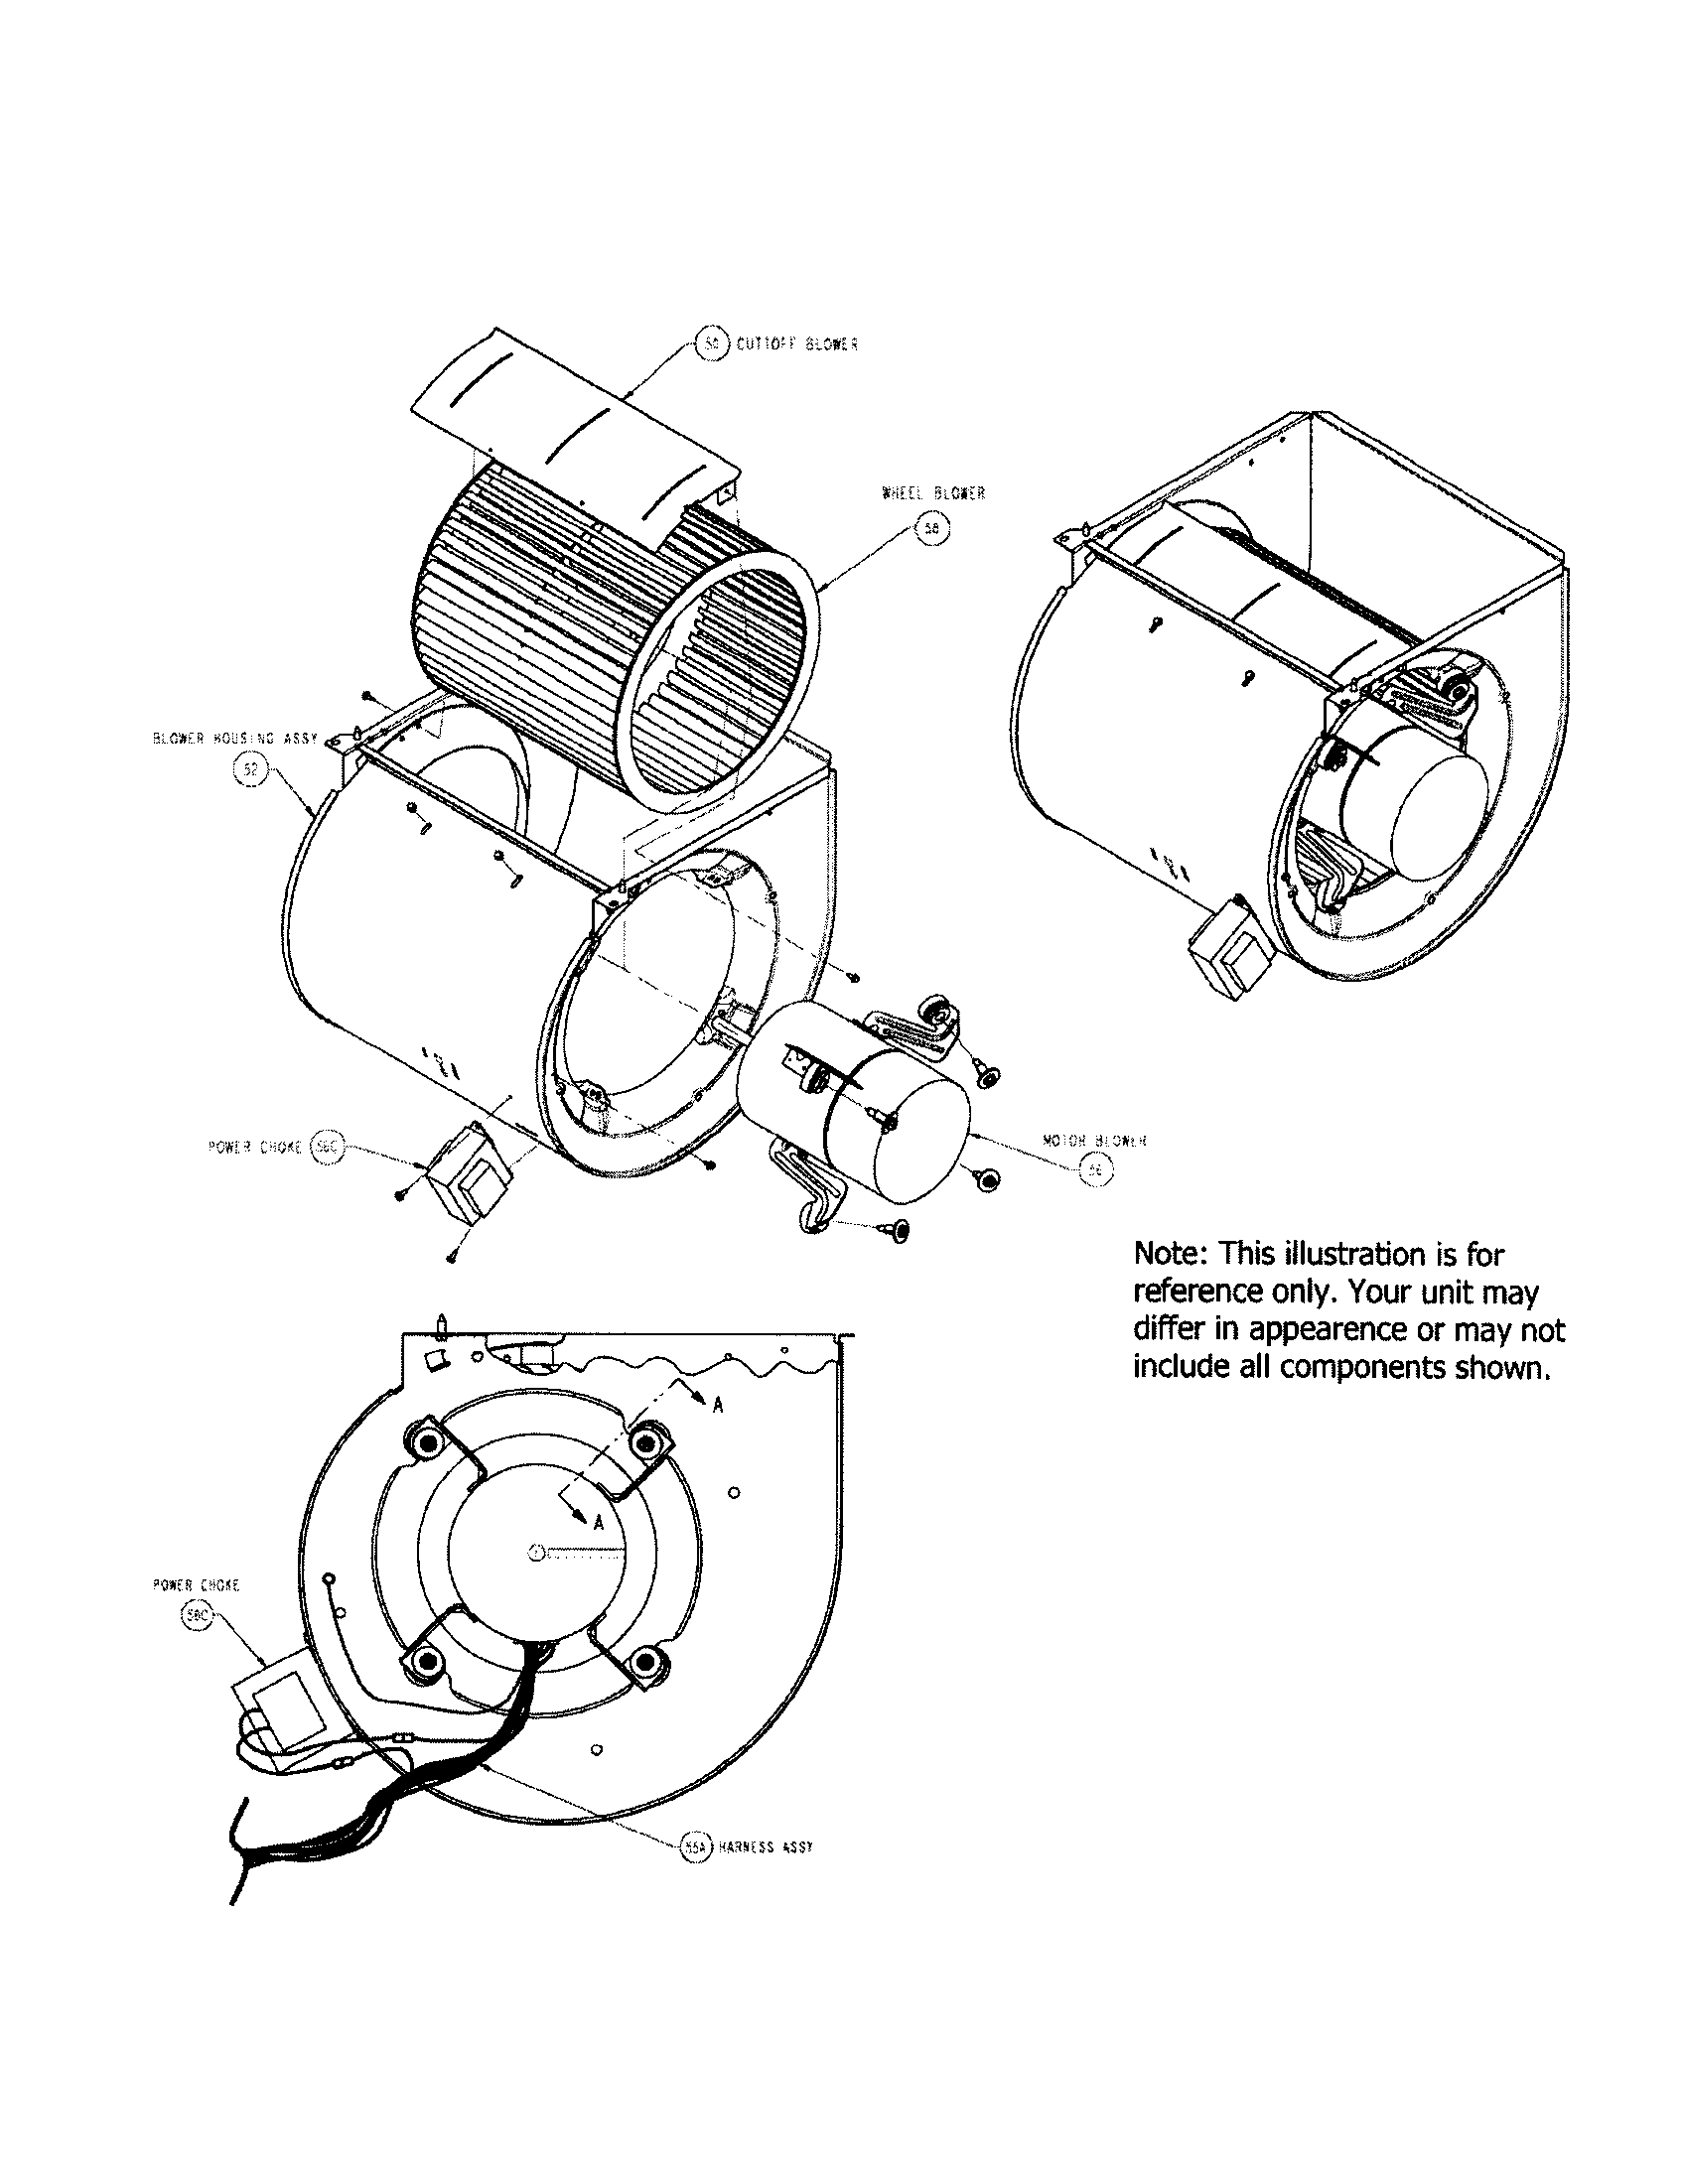 Carrier  Furnace  Blower assembly